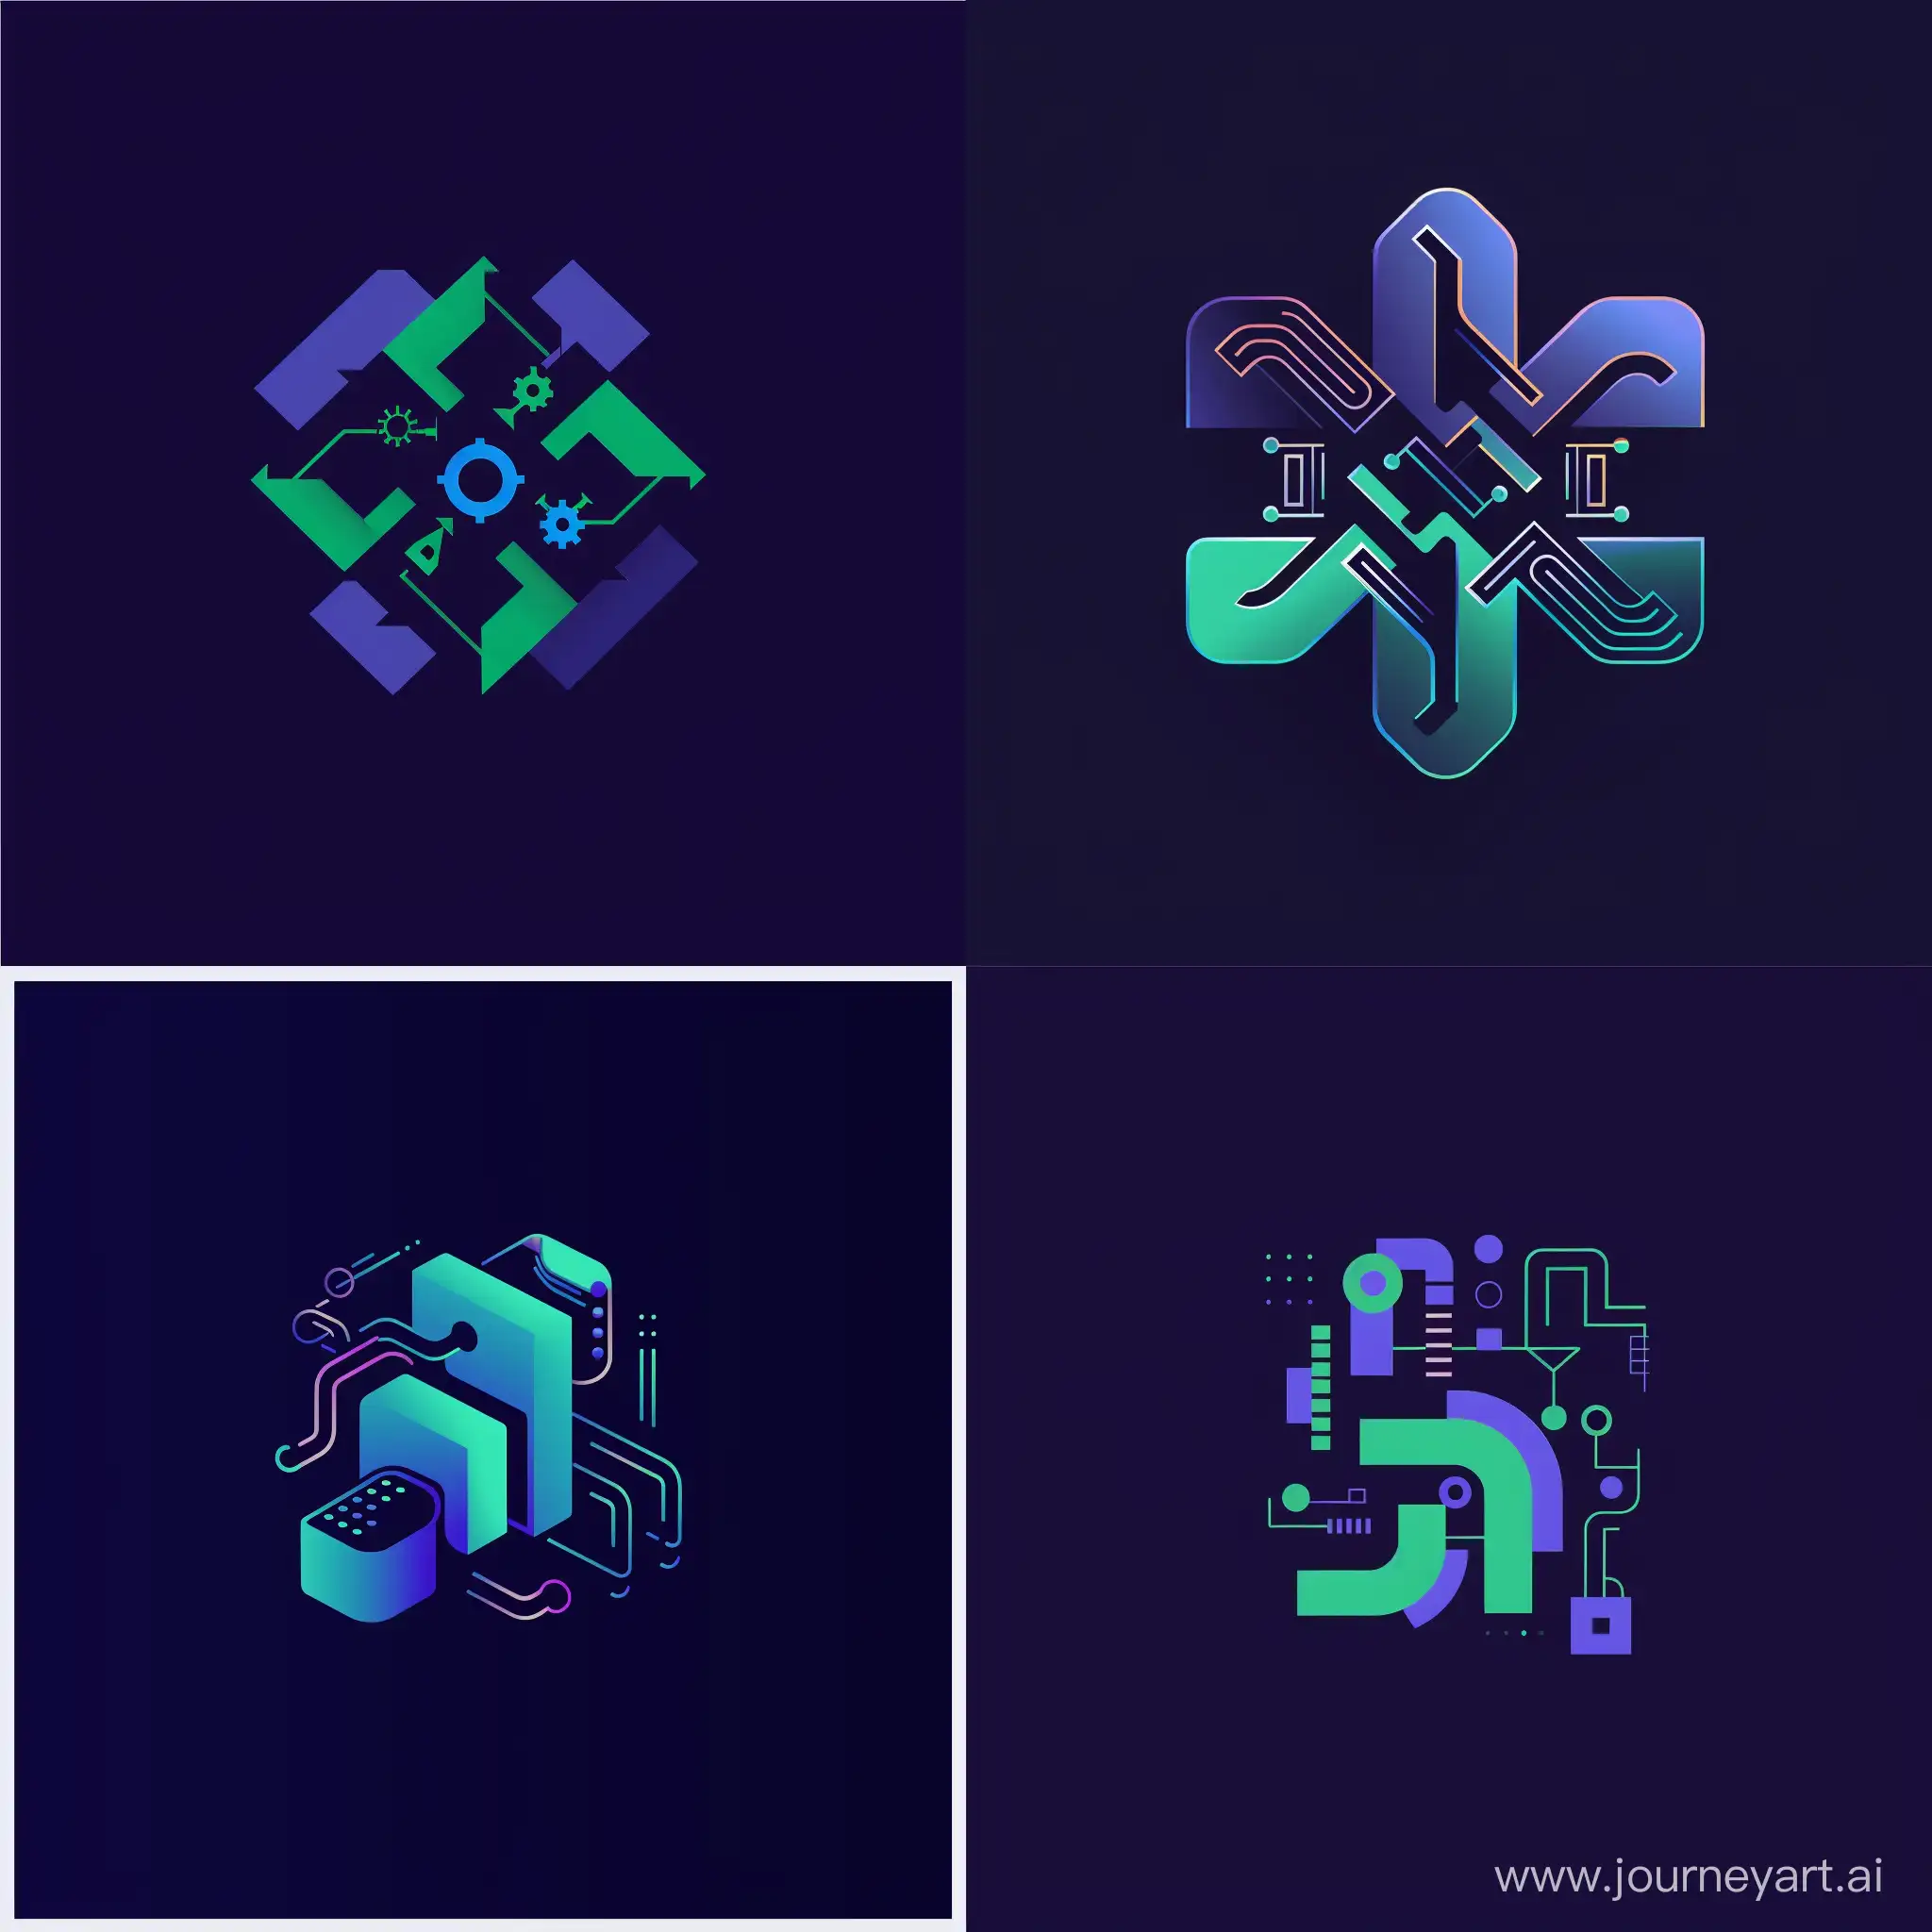 HighTech-Design-and-Engineering-Logo-in-Dark-Blue-and-Violet-Green